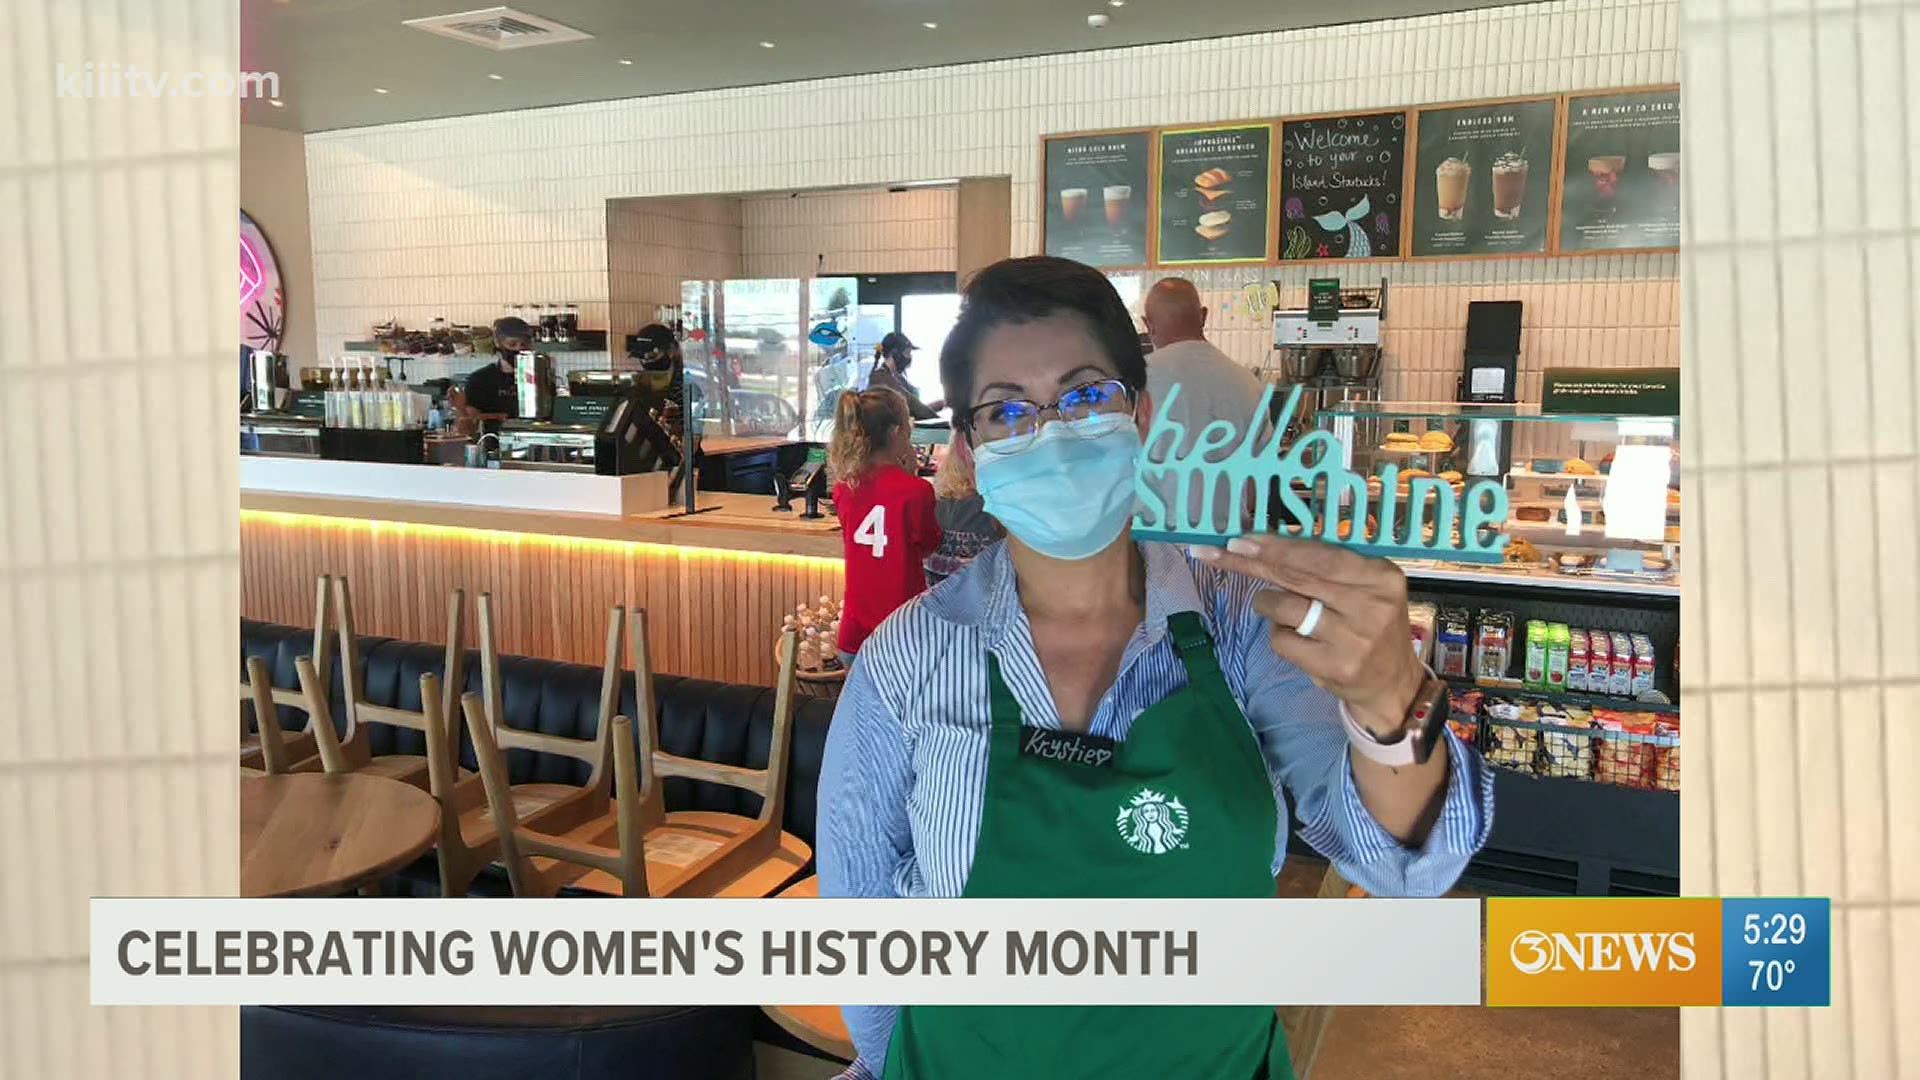 Krystie Ruth Kobos is someone to know this Women's History month.